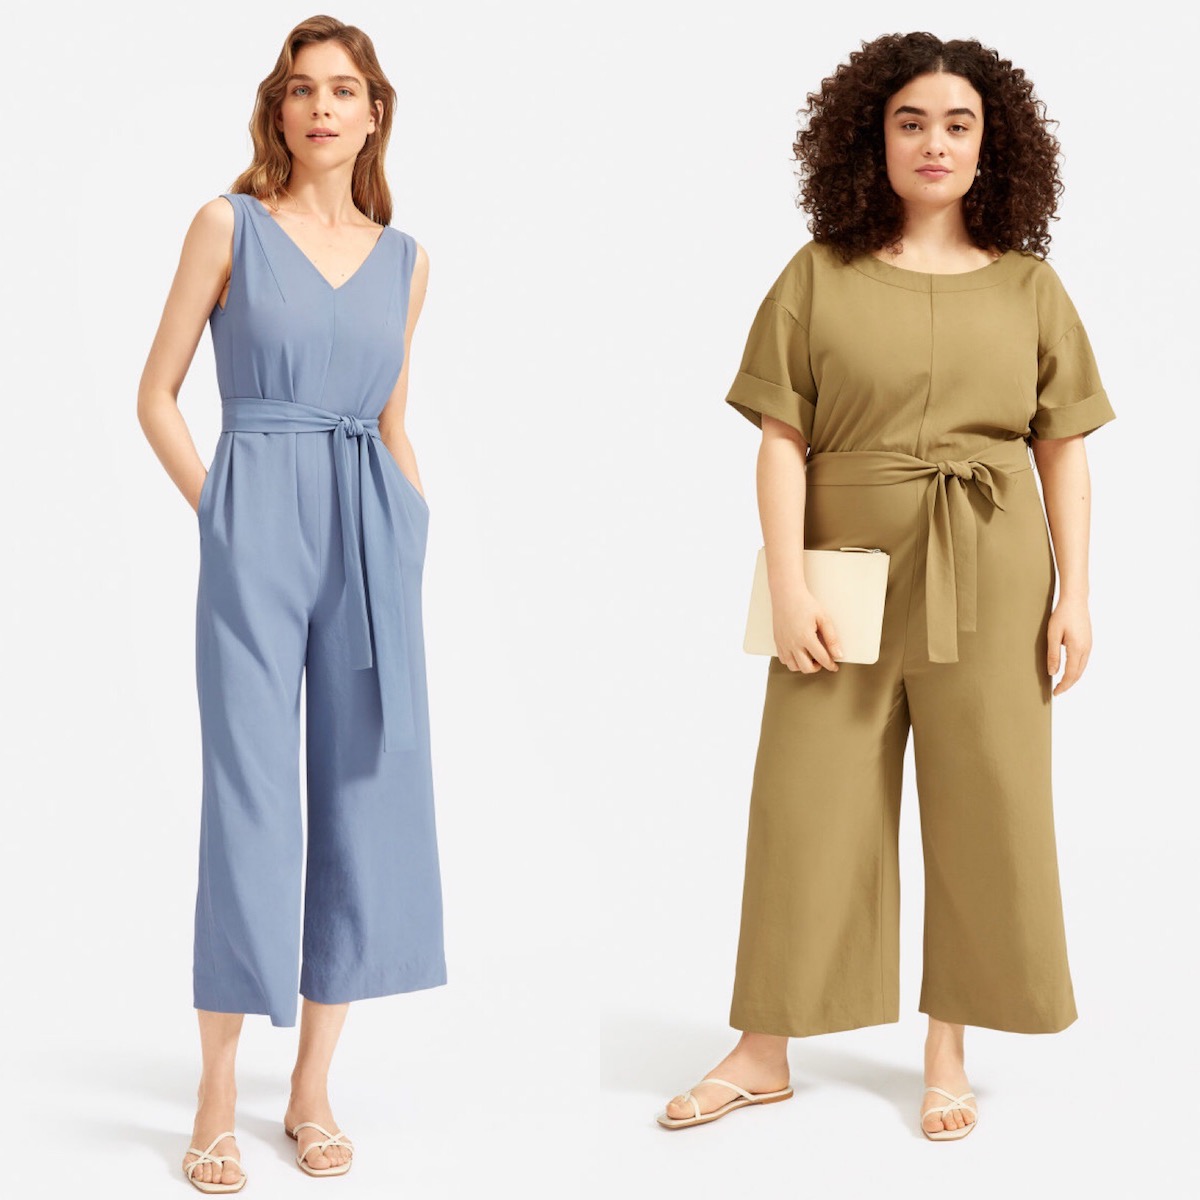 Fitting Room Review: Everlane GoWeave Jumpsuits - Welcome Objects